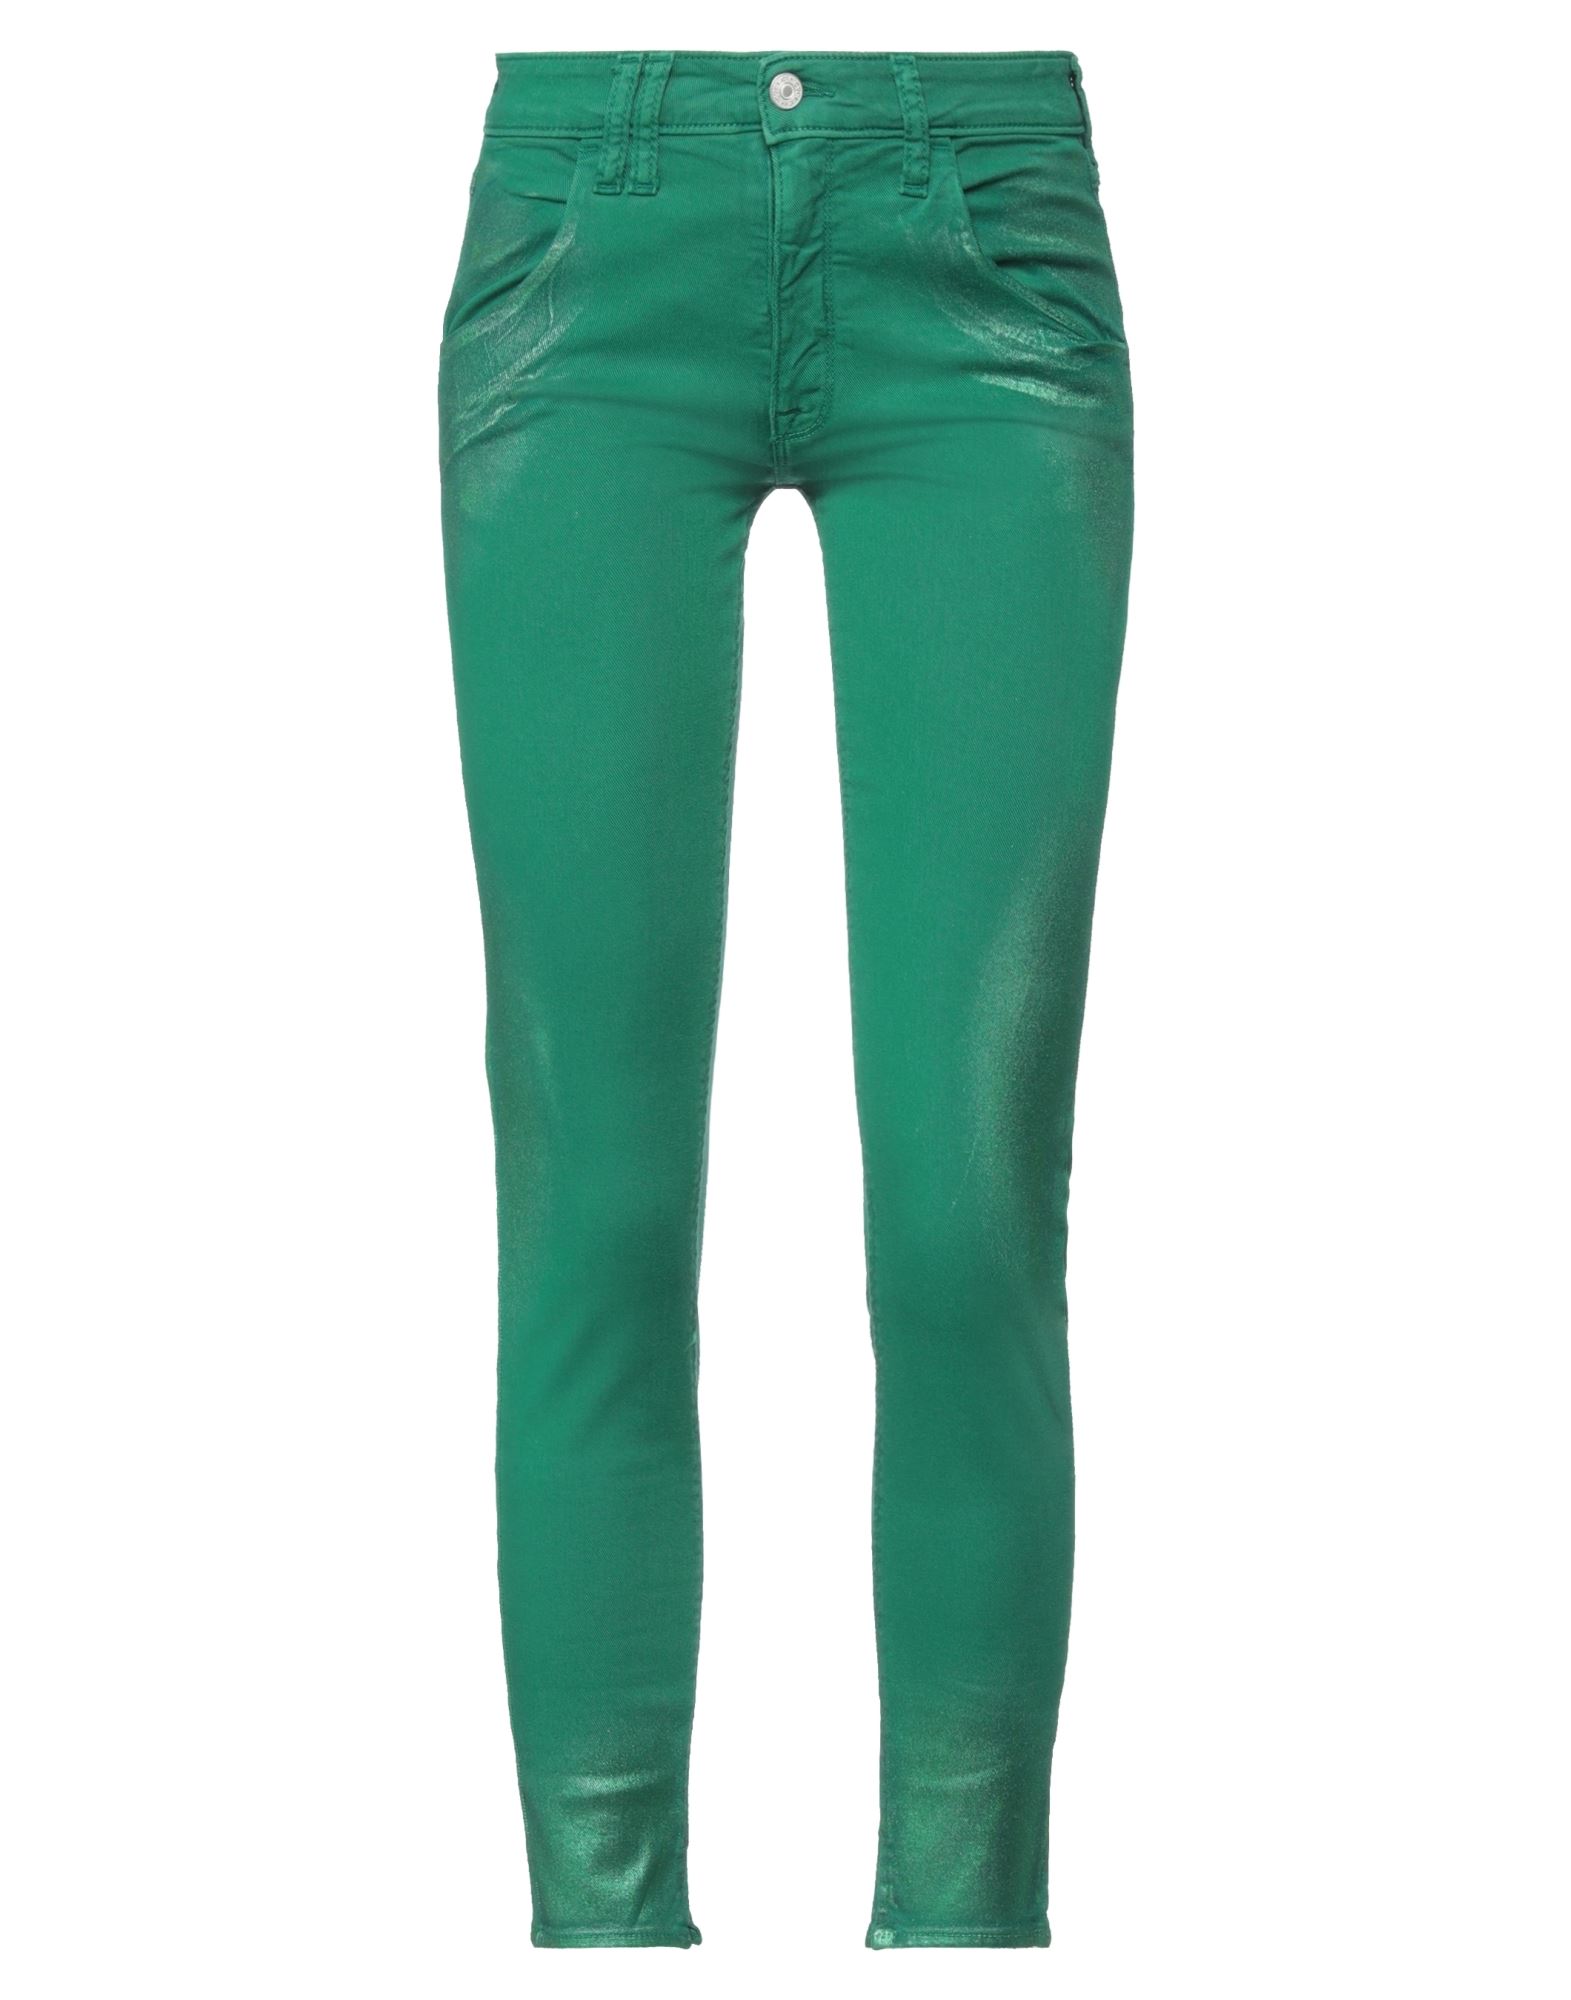 Cycle Denim Cropped In Green